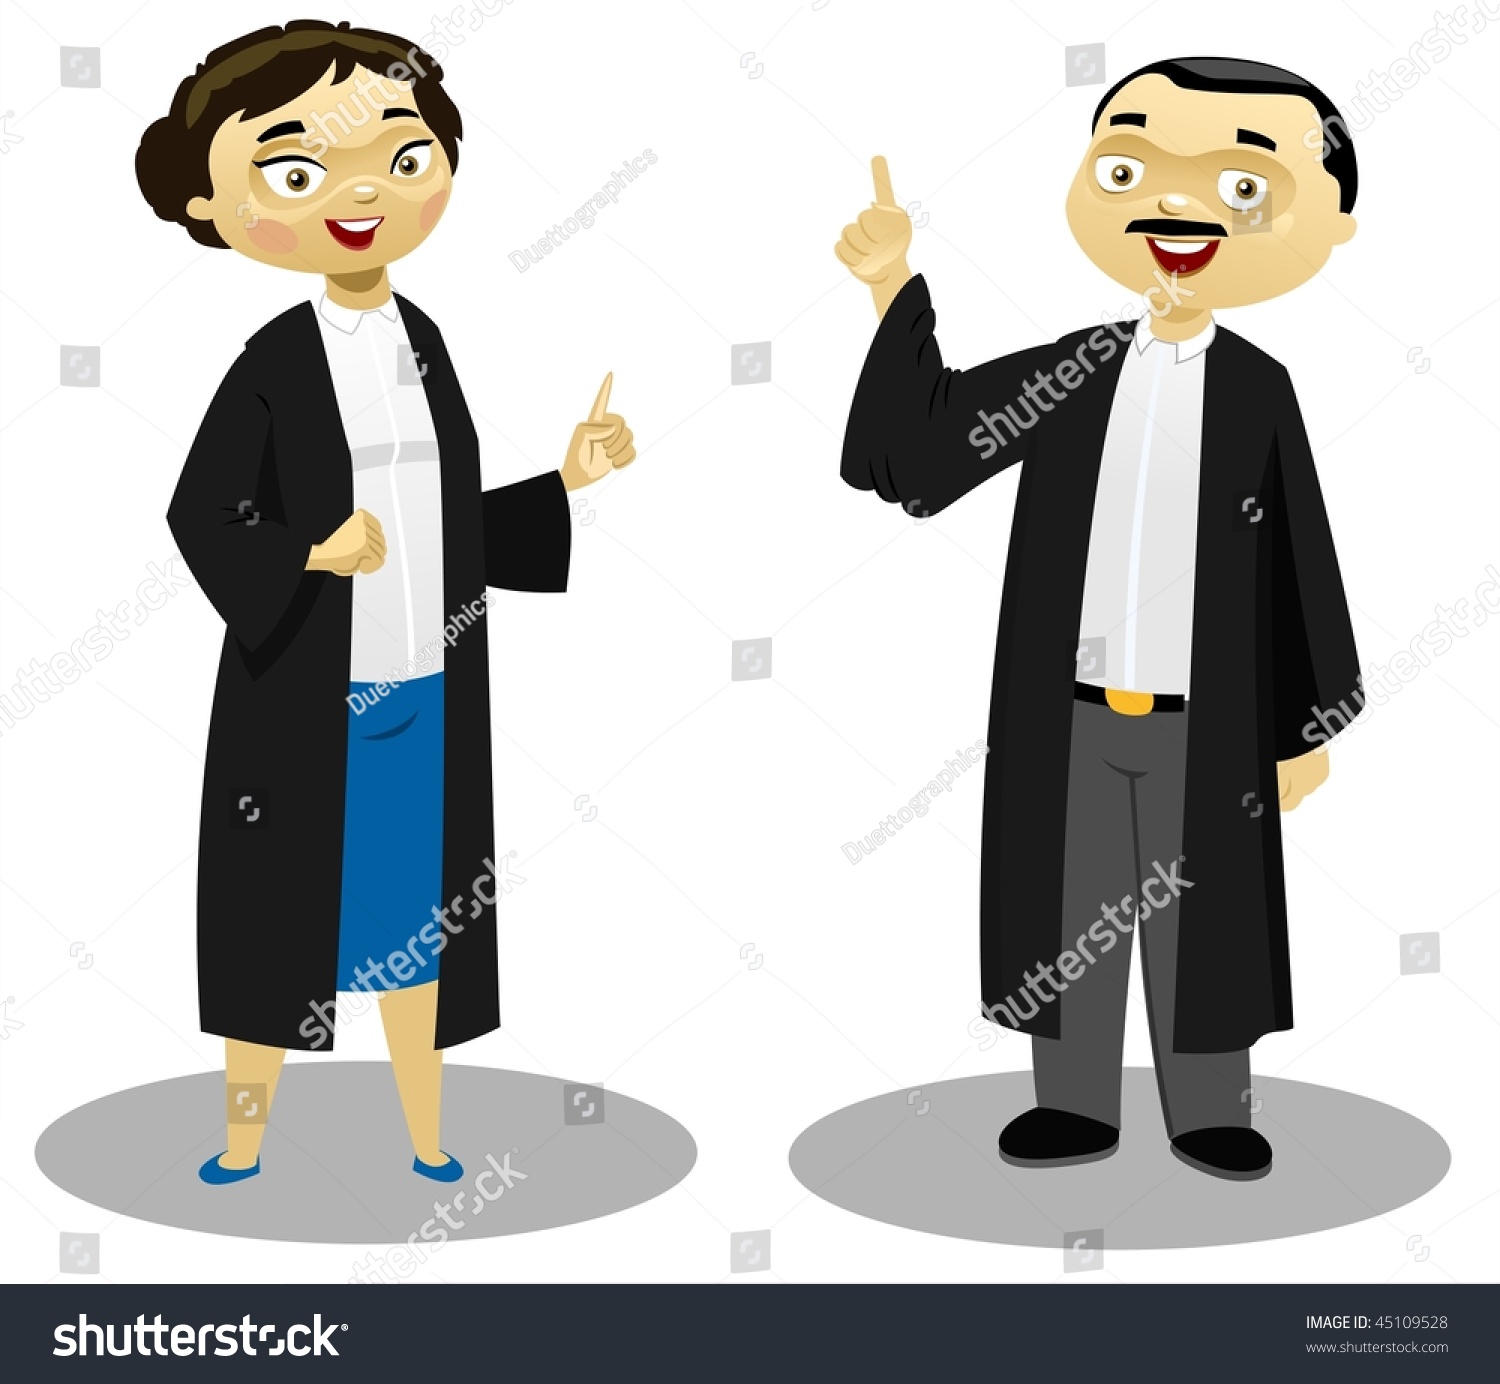 lawyer clip art images free - photo #23